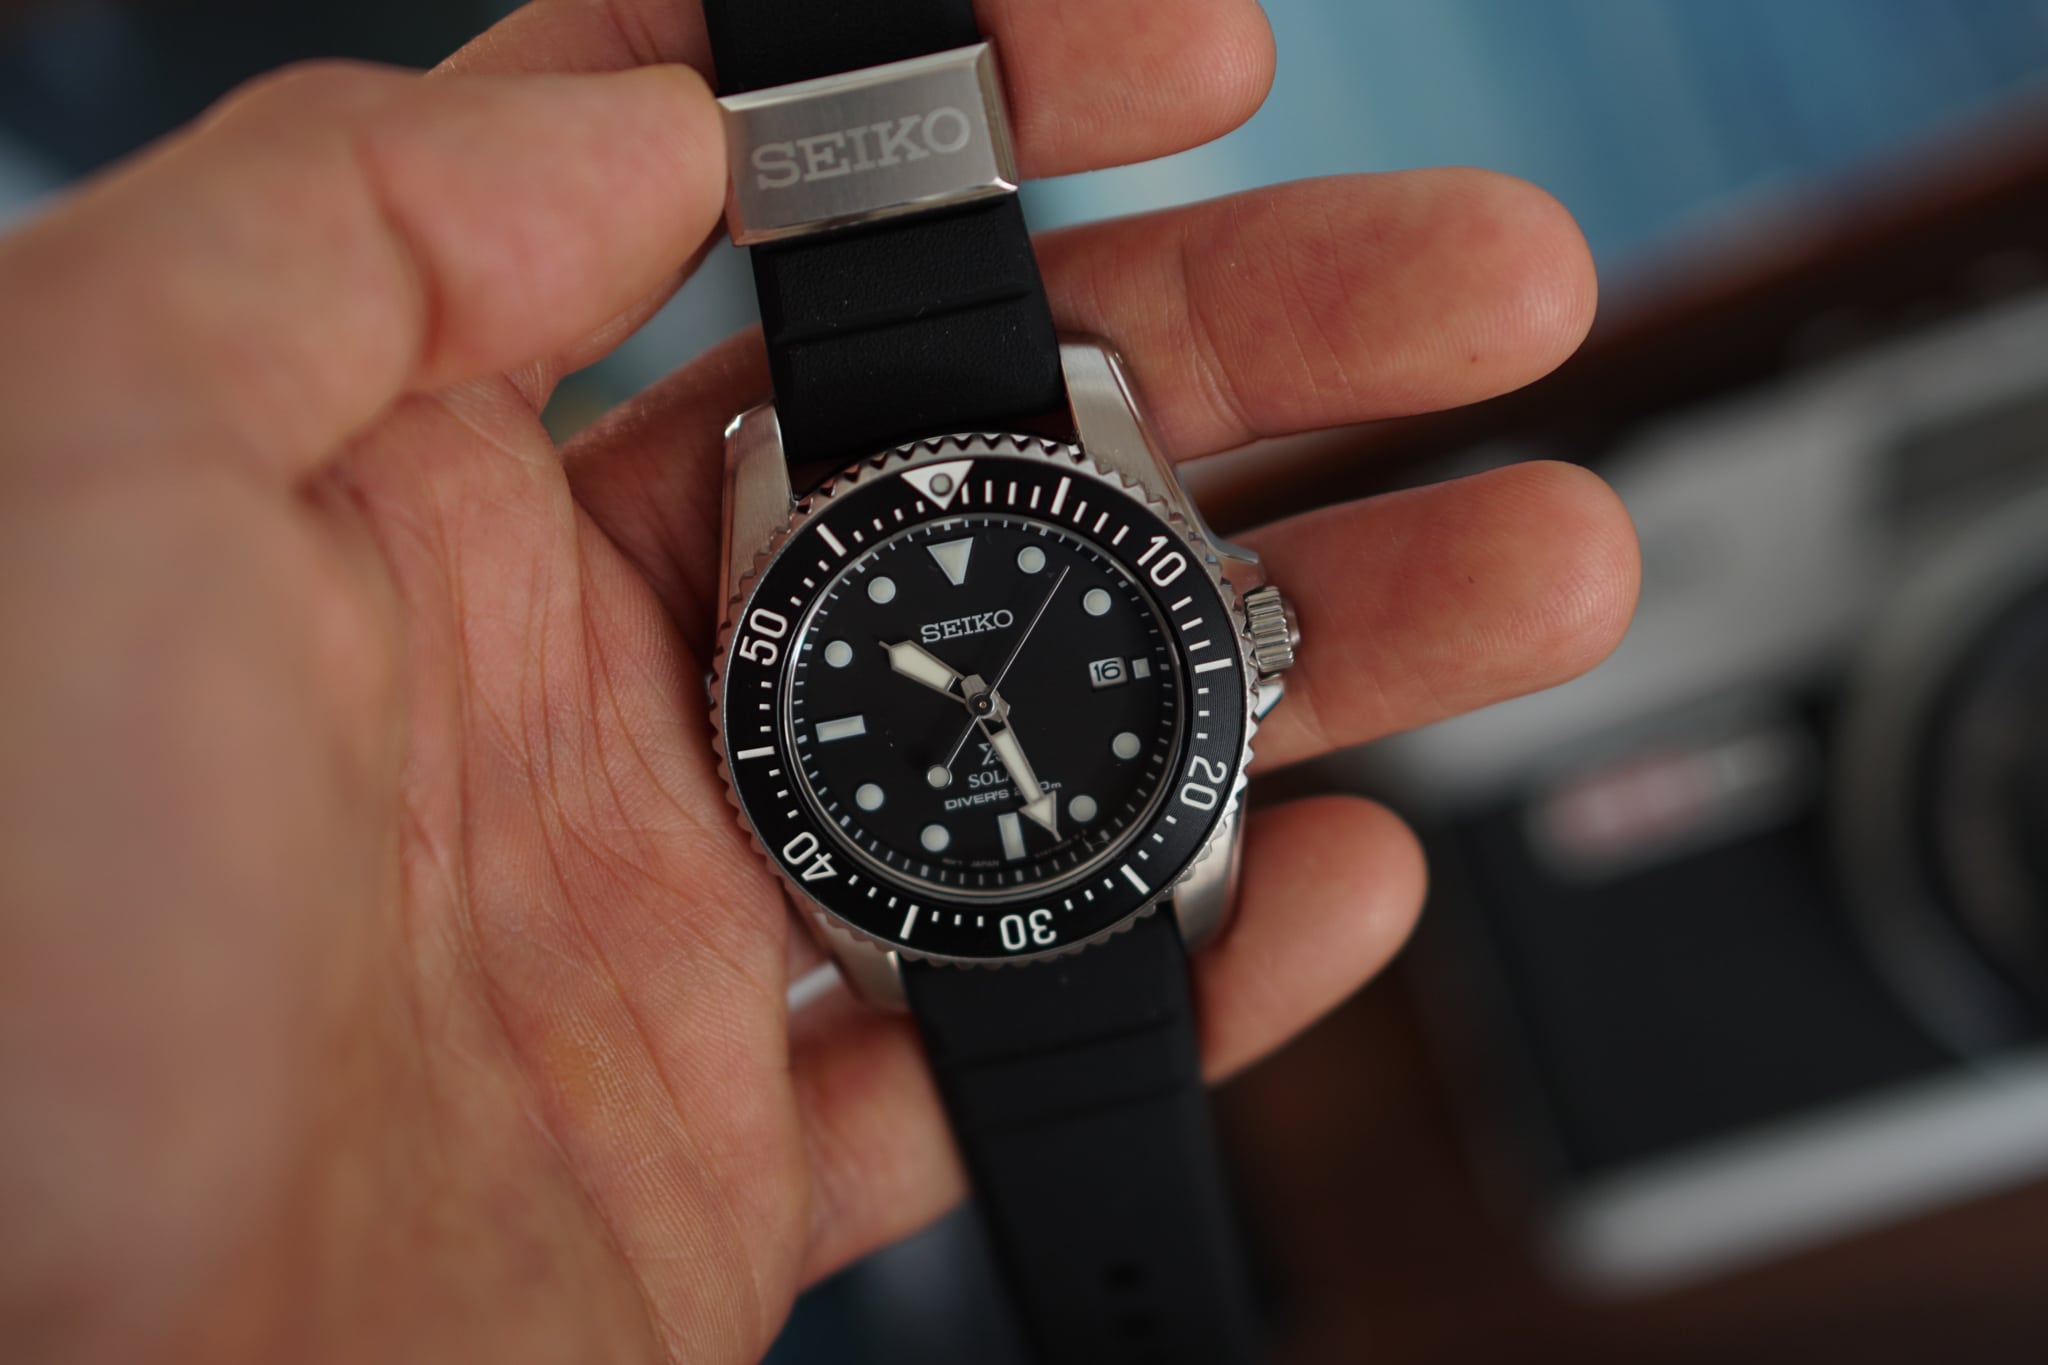 A Winter Surf Session With The Seiko SNE573 Solar Diver - Worn & Wound